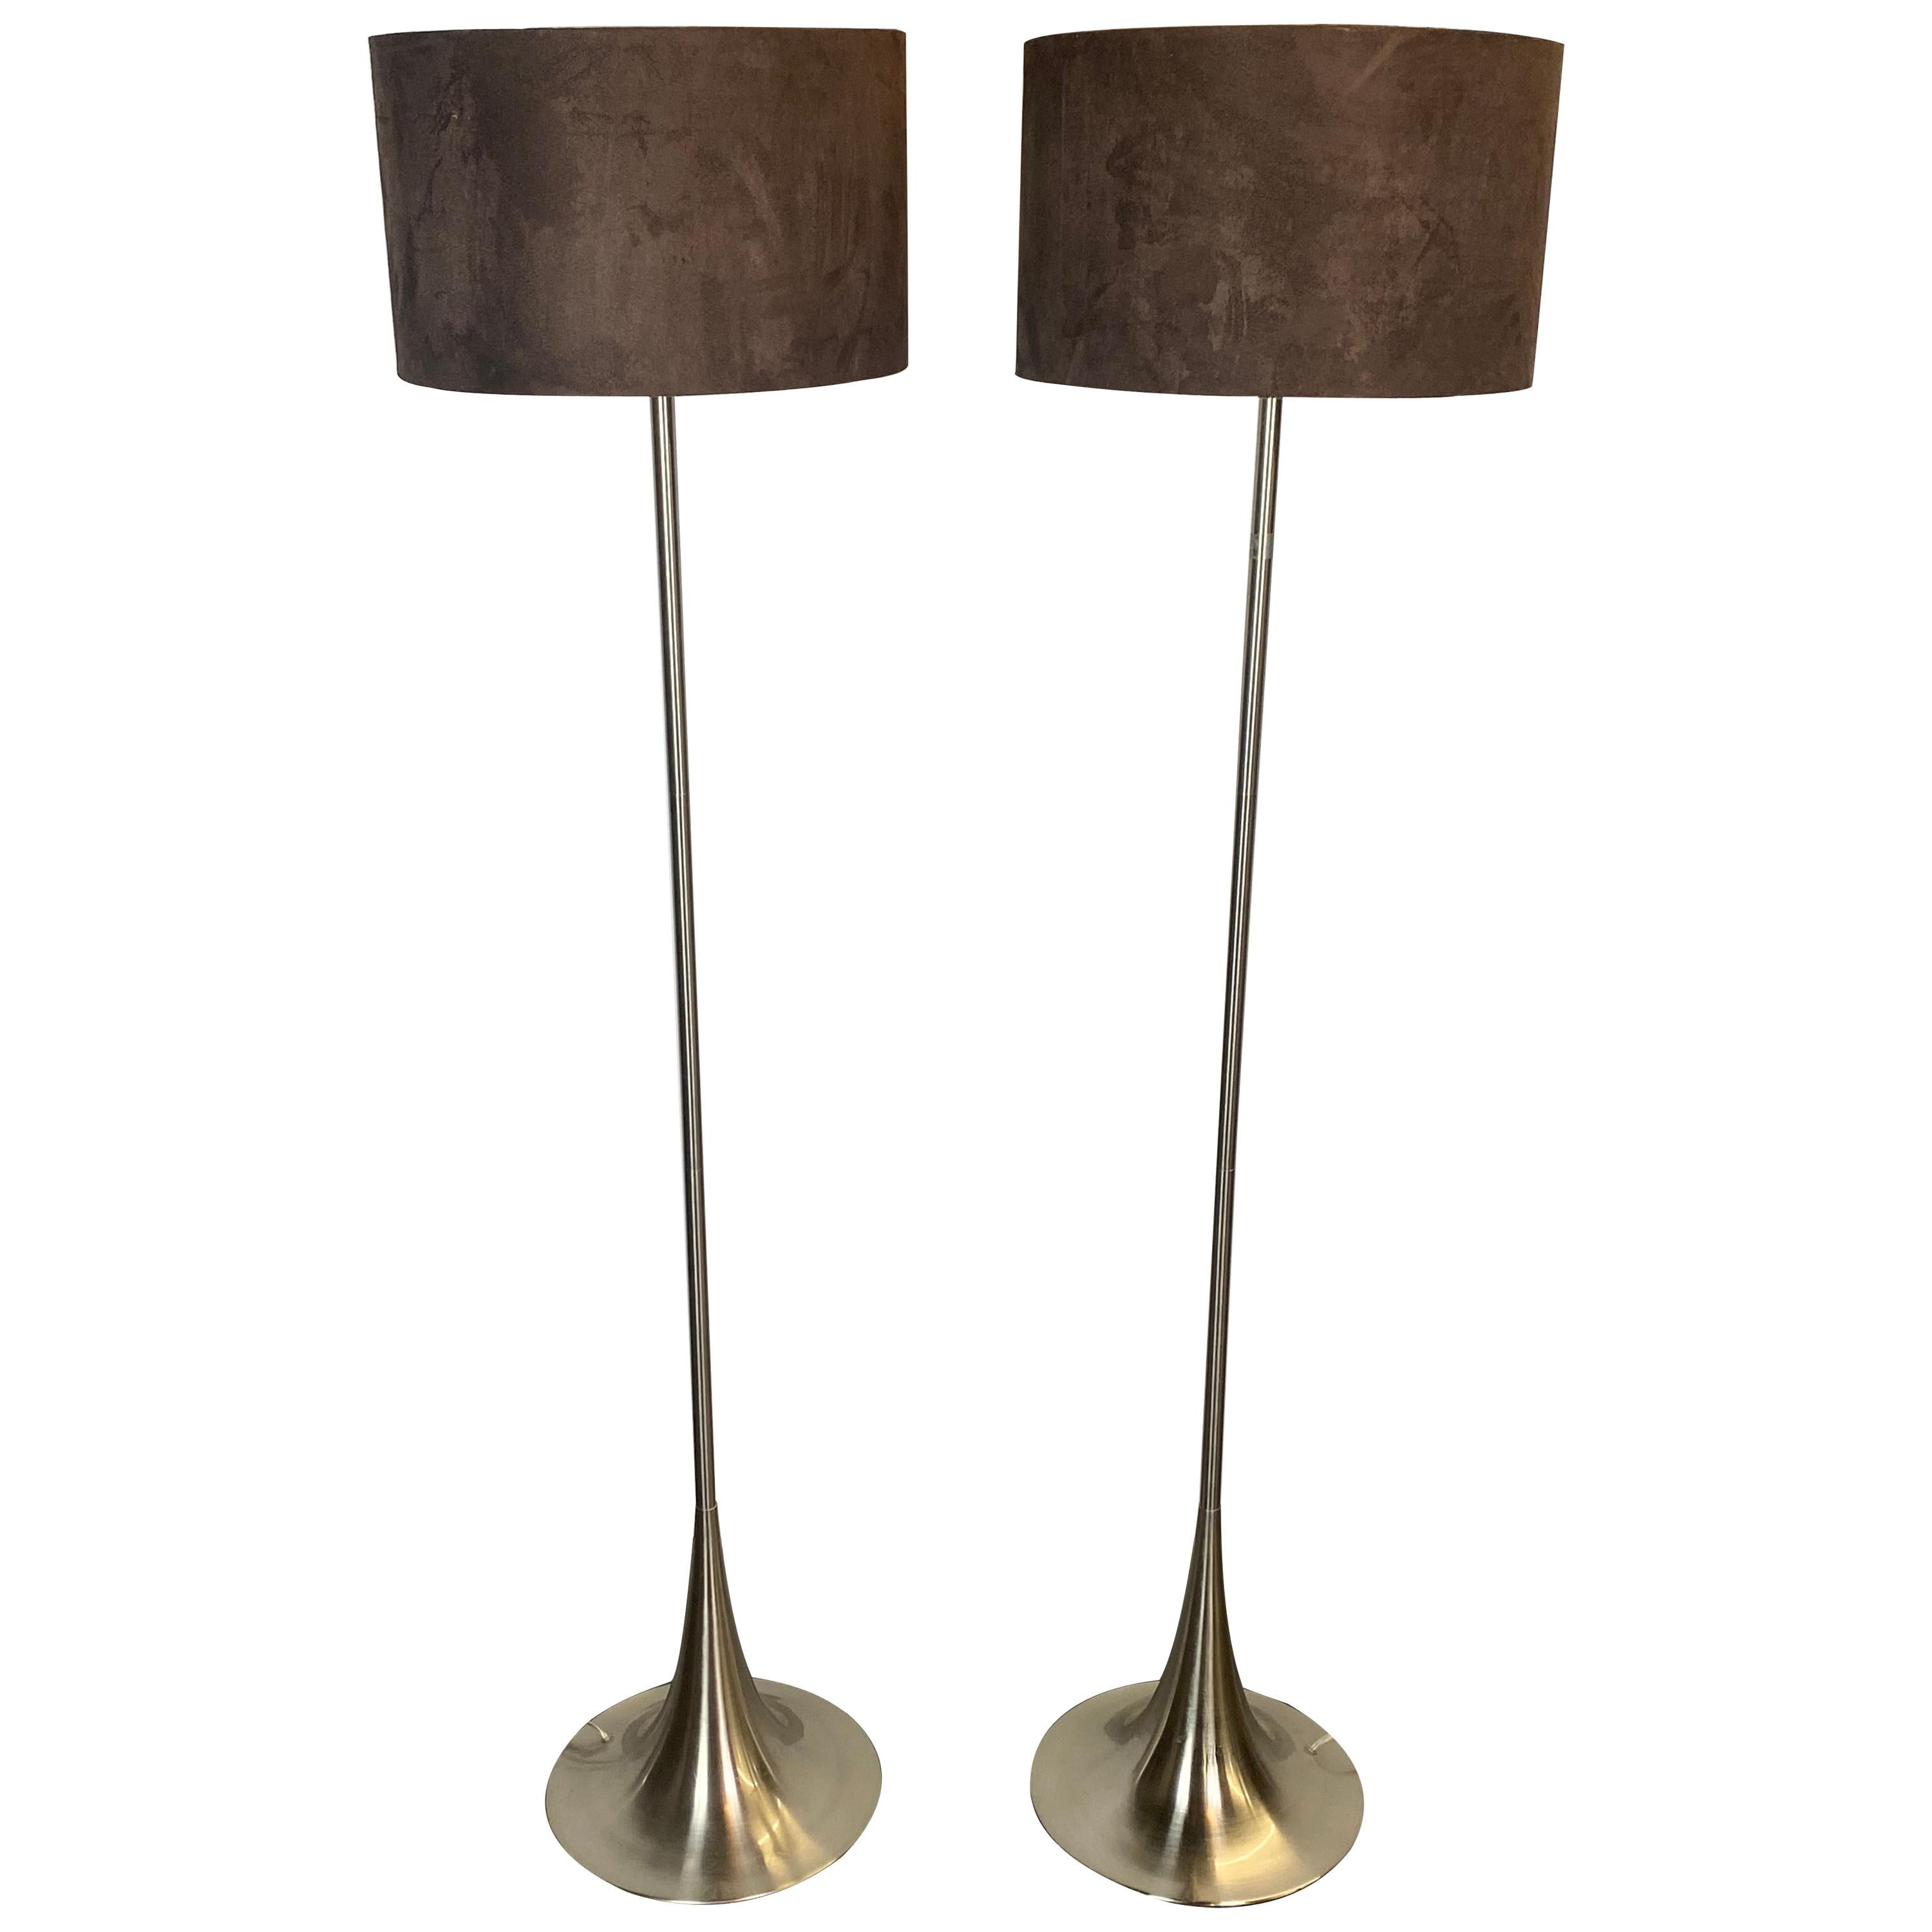 Chic Mid-Century Modern Style Floor Lamps with Tulip Base and Barrel Shades